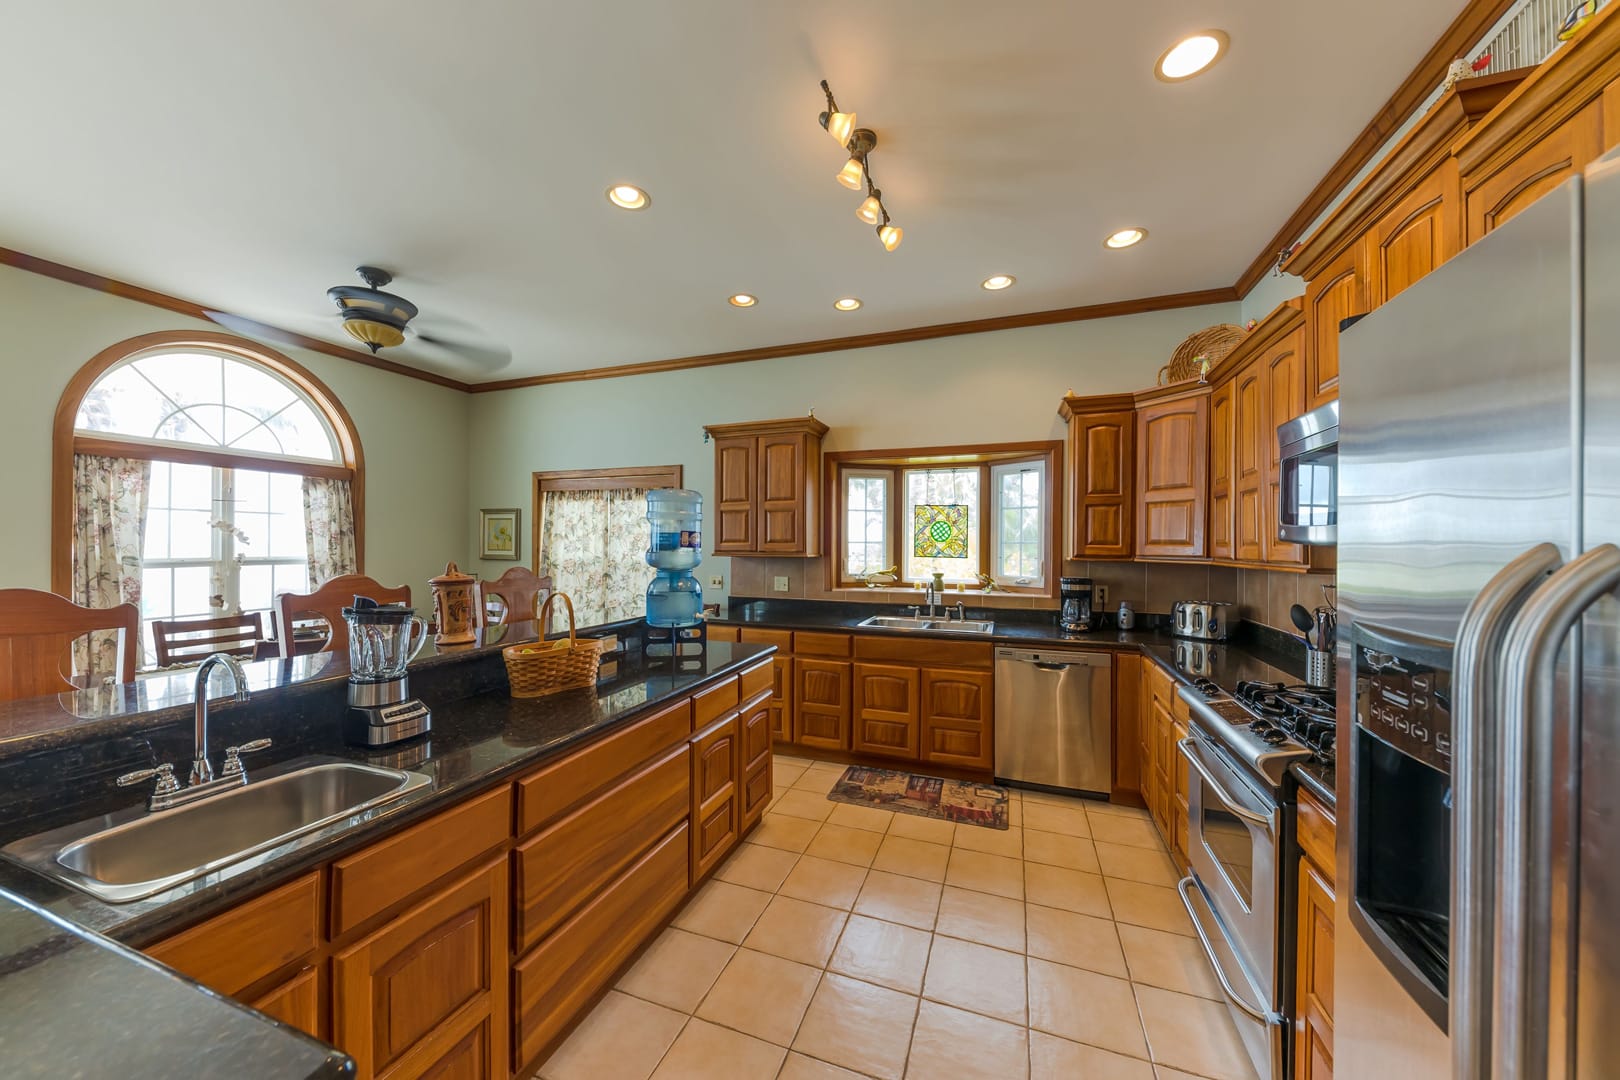 Fully equipped, modern kitchen with sleek appliances, granite countertops, and tropical accents, providing a convenient and functional space for cooking and entertaining.